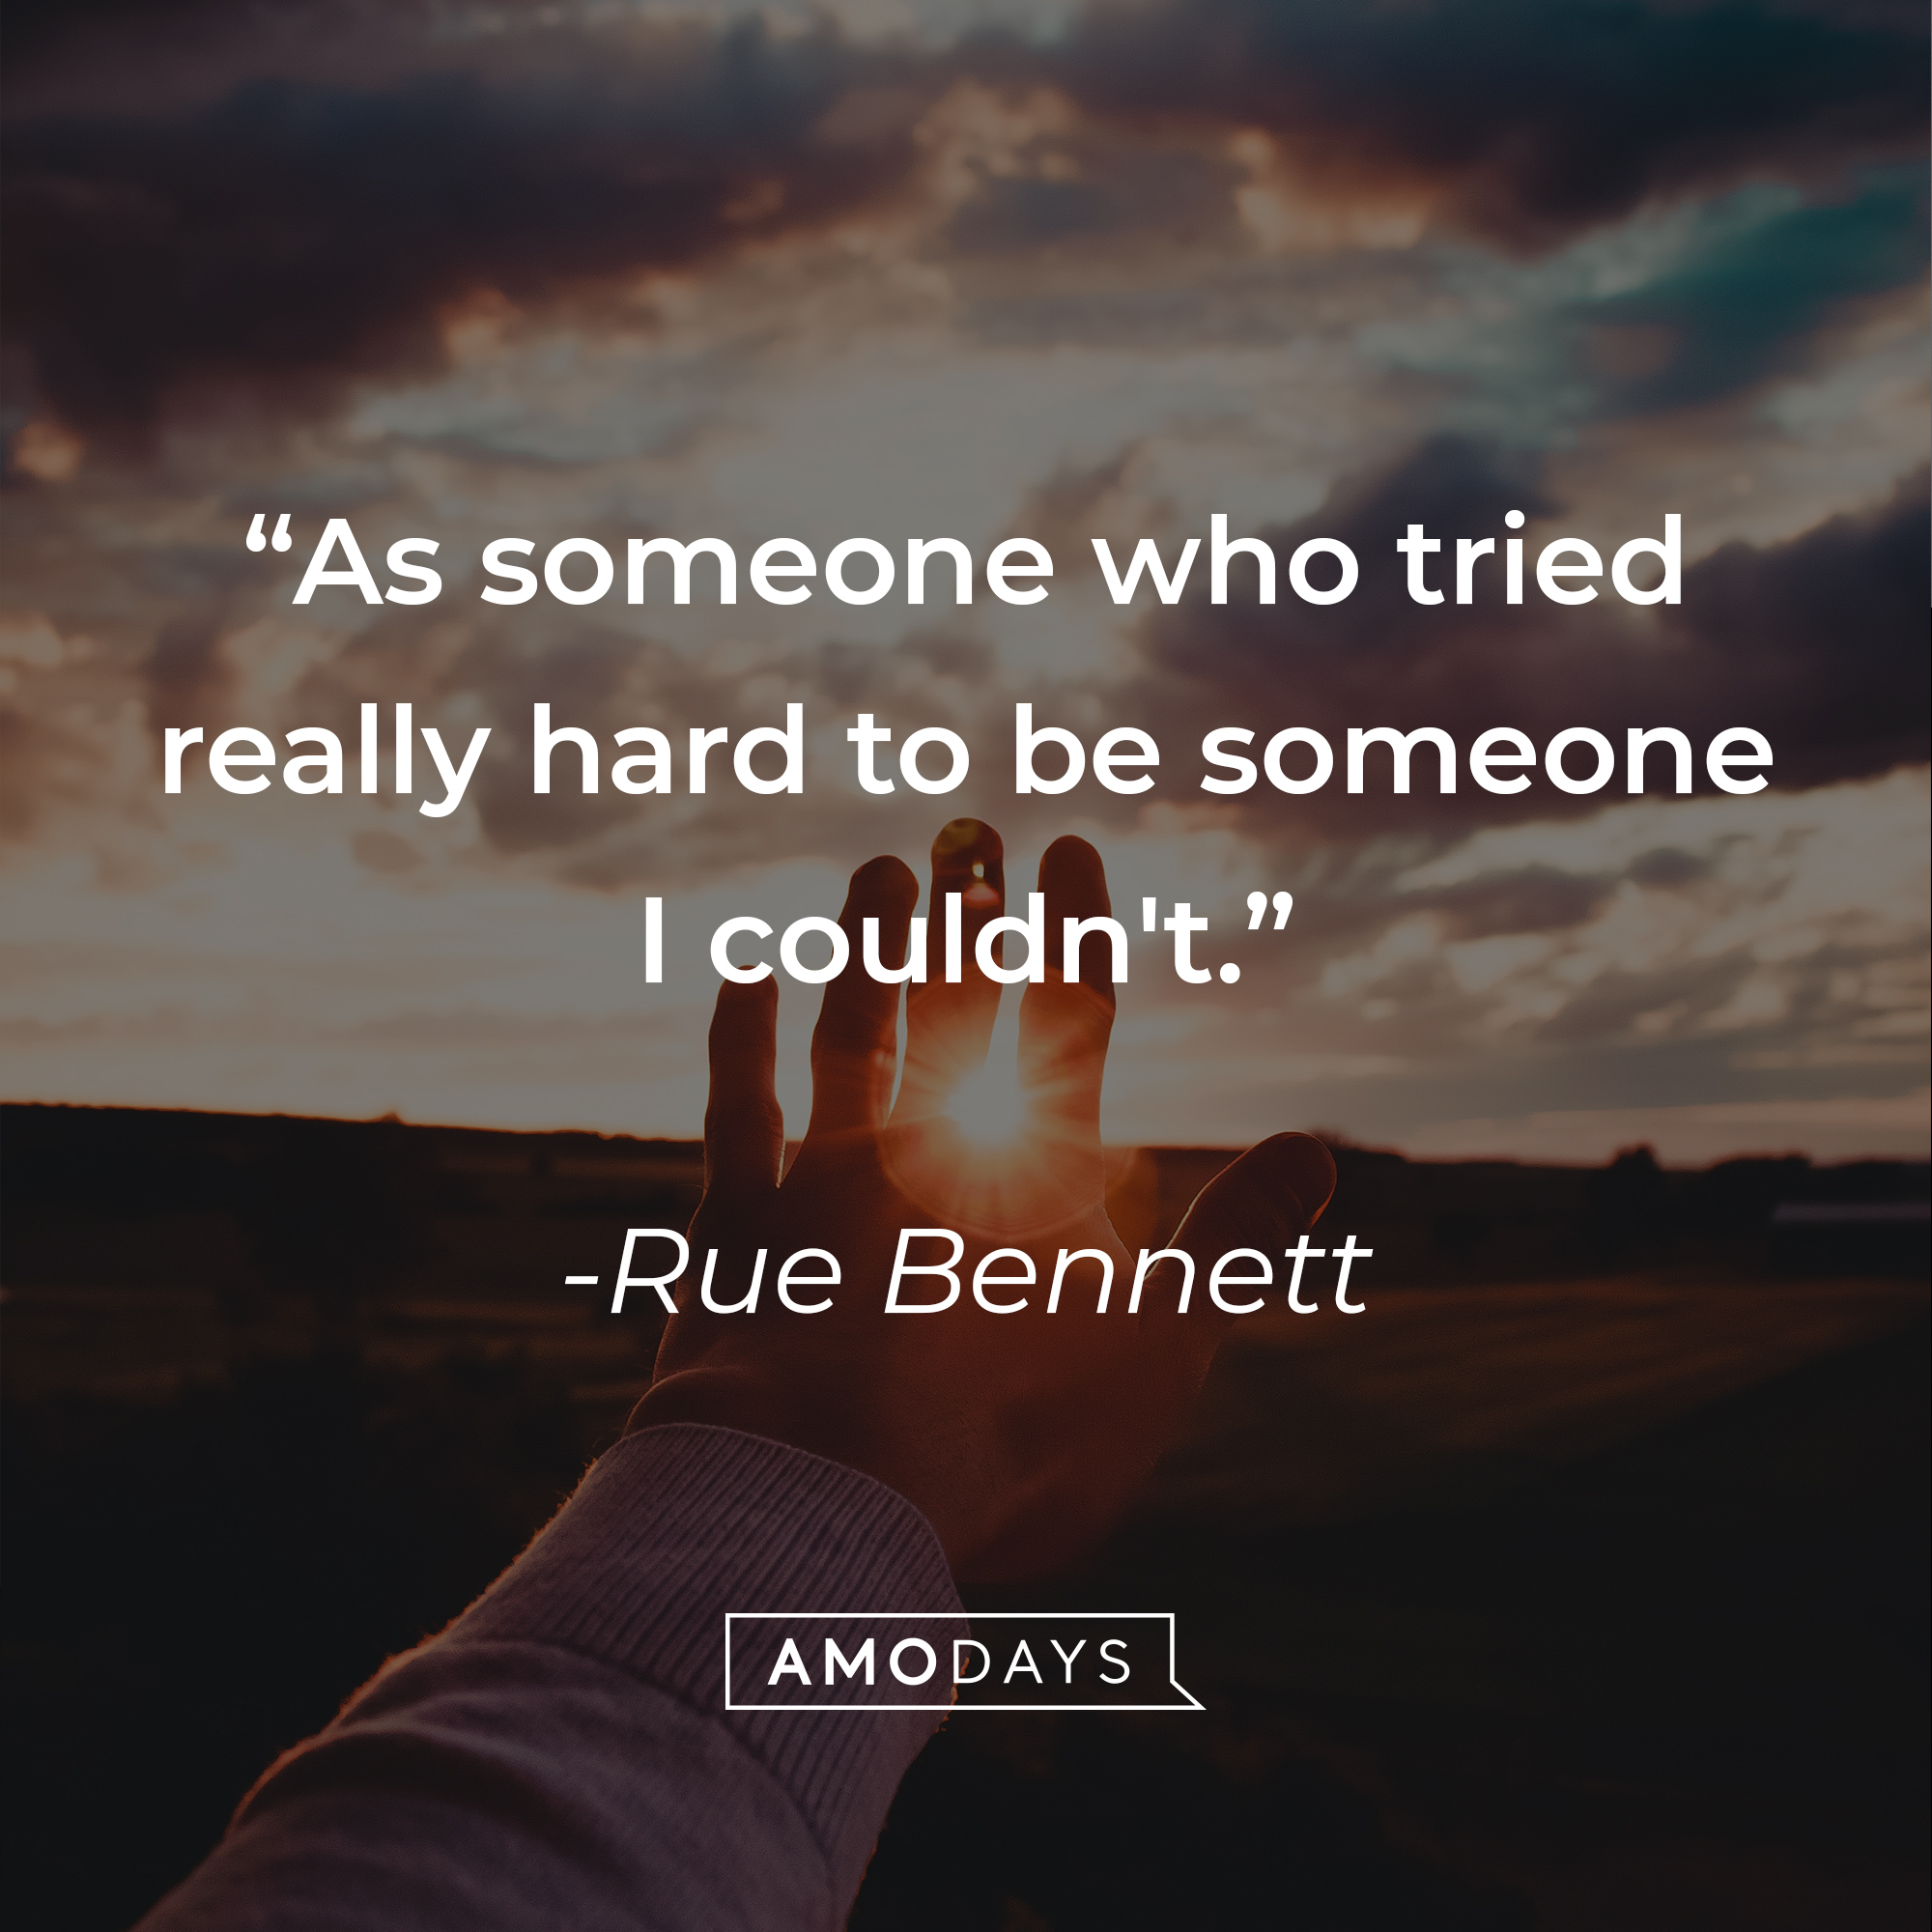 Rue Bennett's quote: "As someone who tried really hard to be someone I couldn't." | Source: unsplash.com